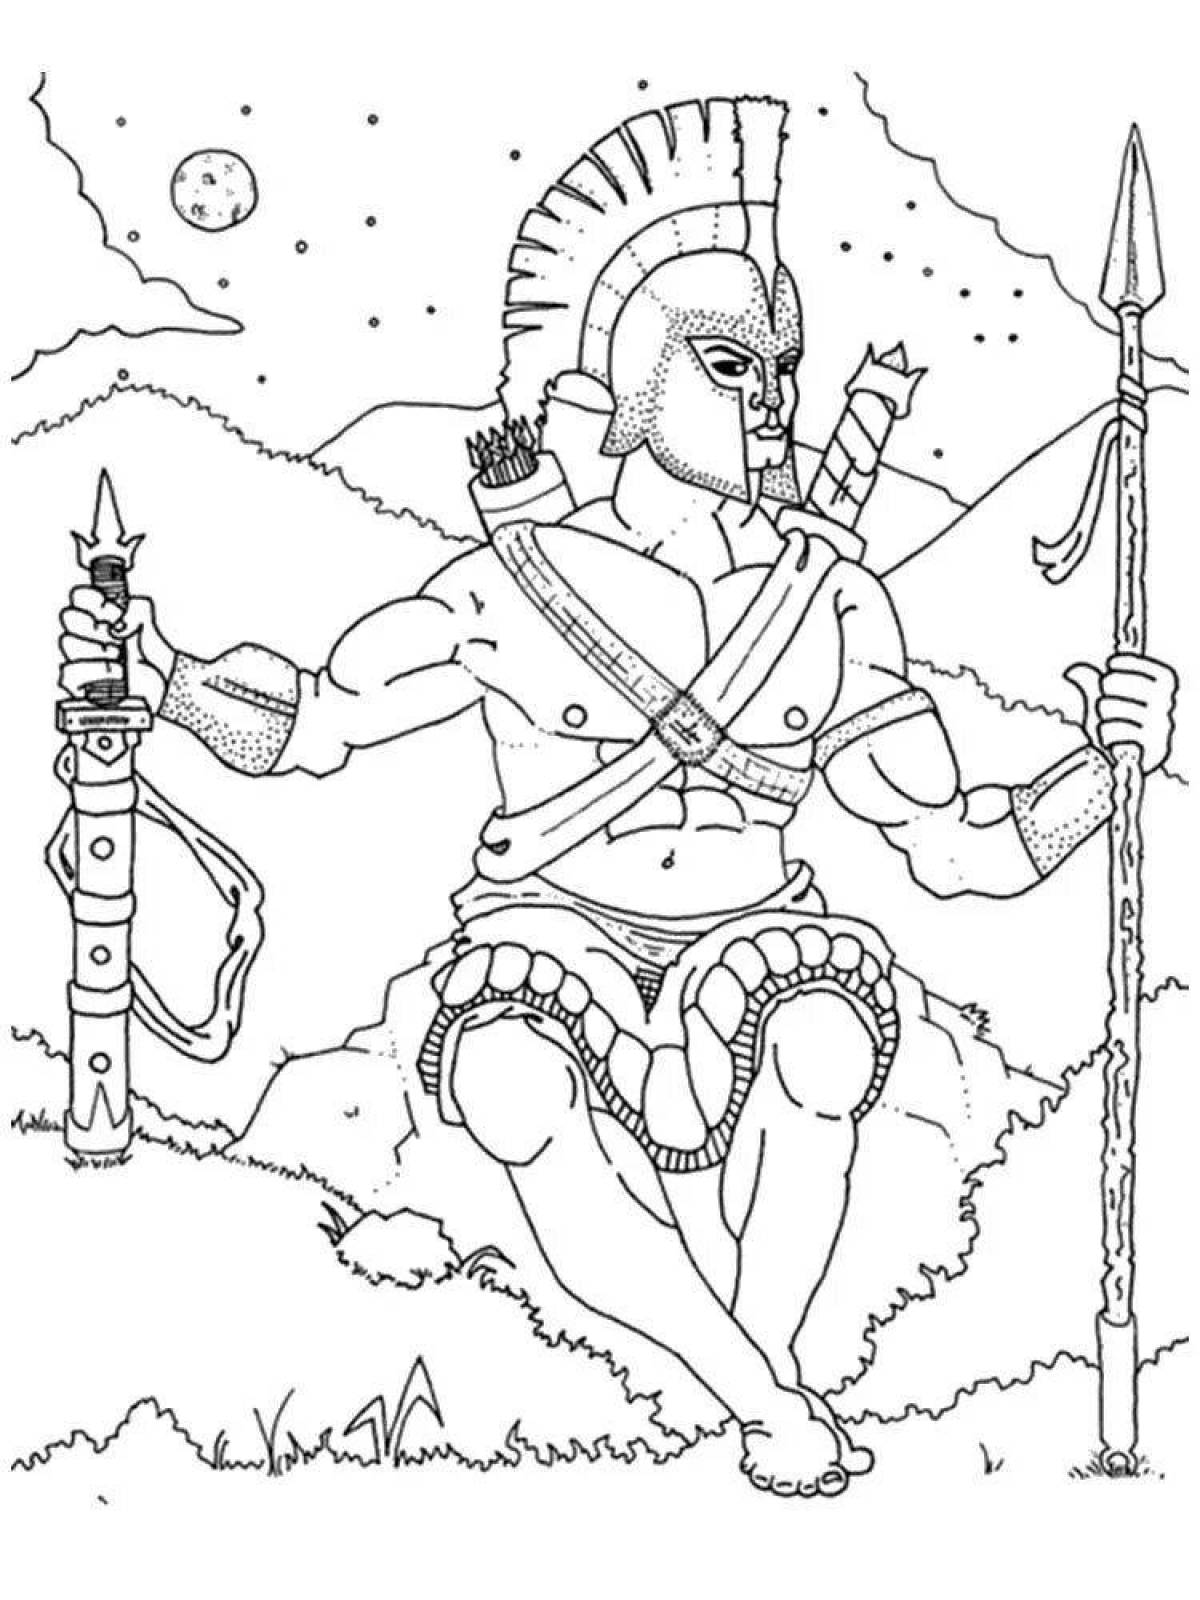 Dazzling ancient greece coloring book